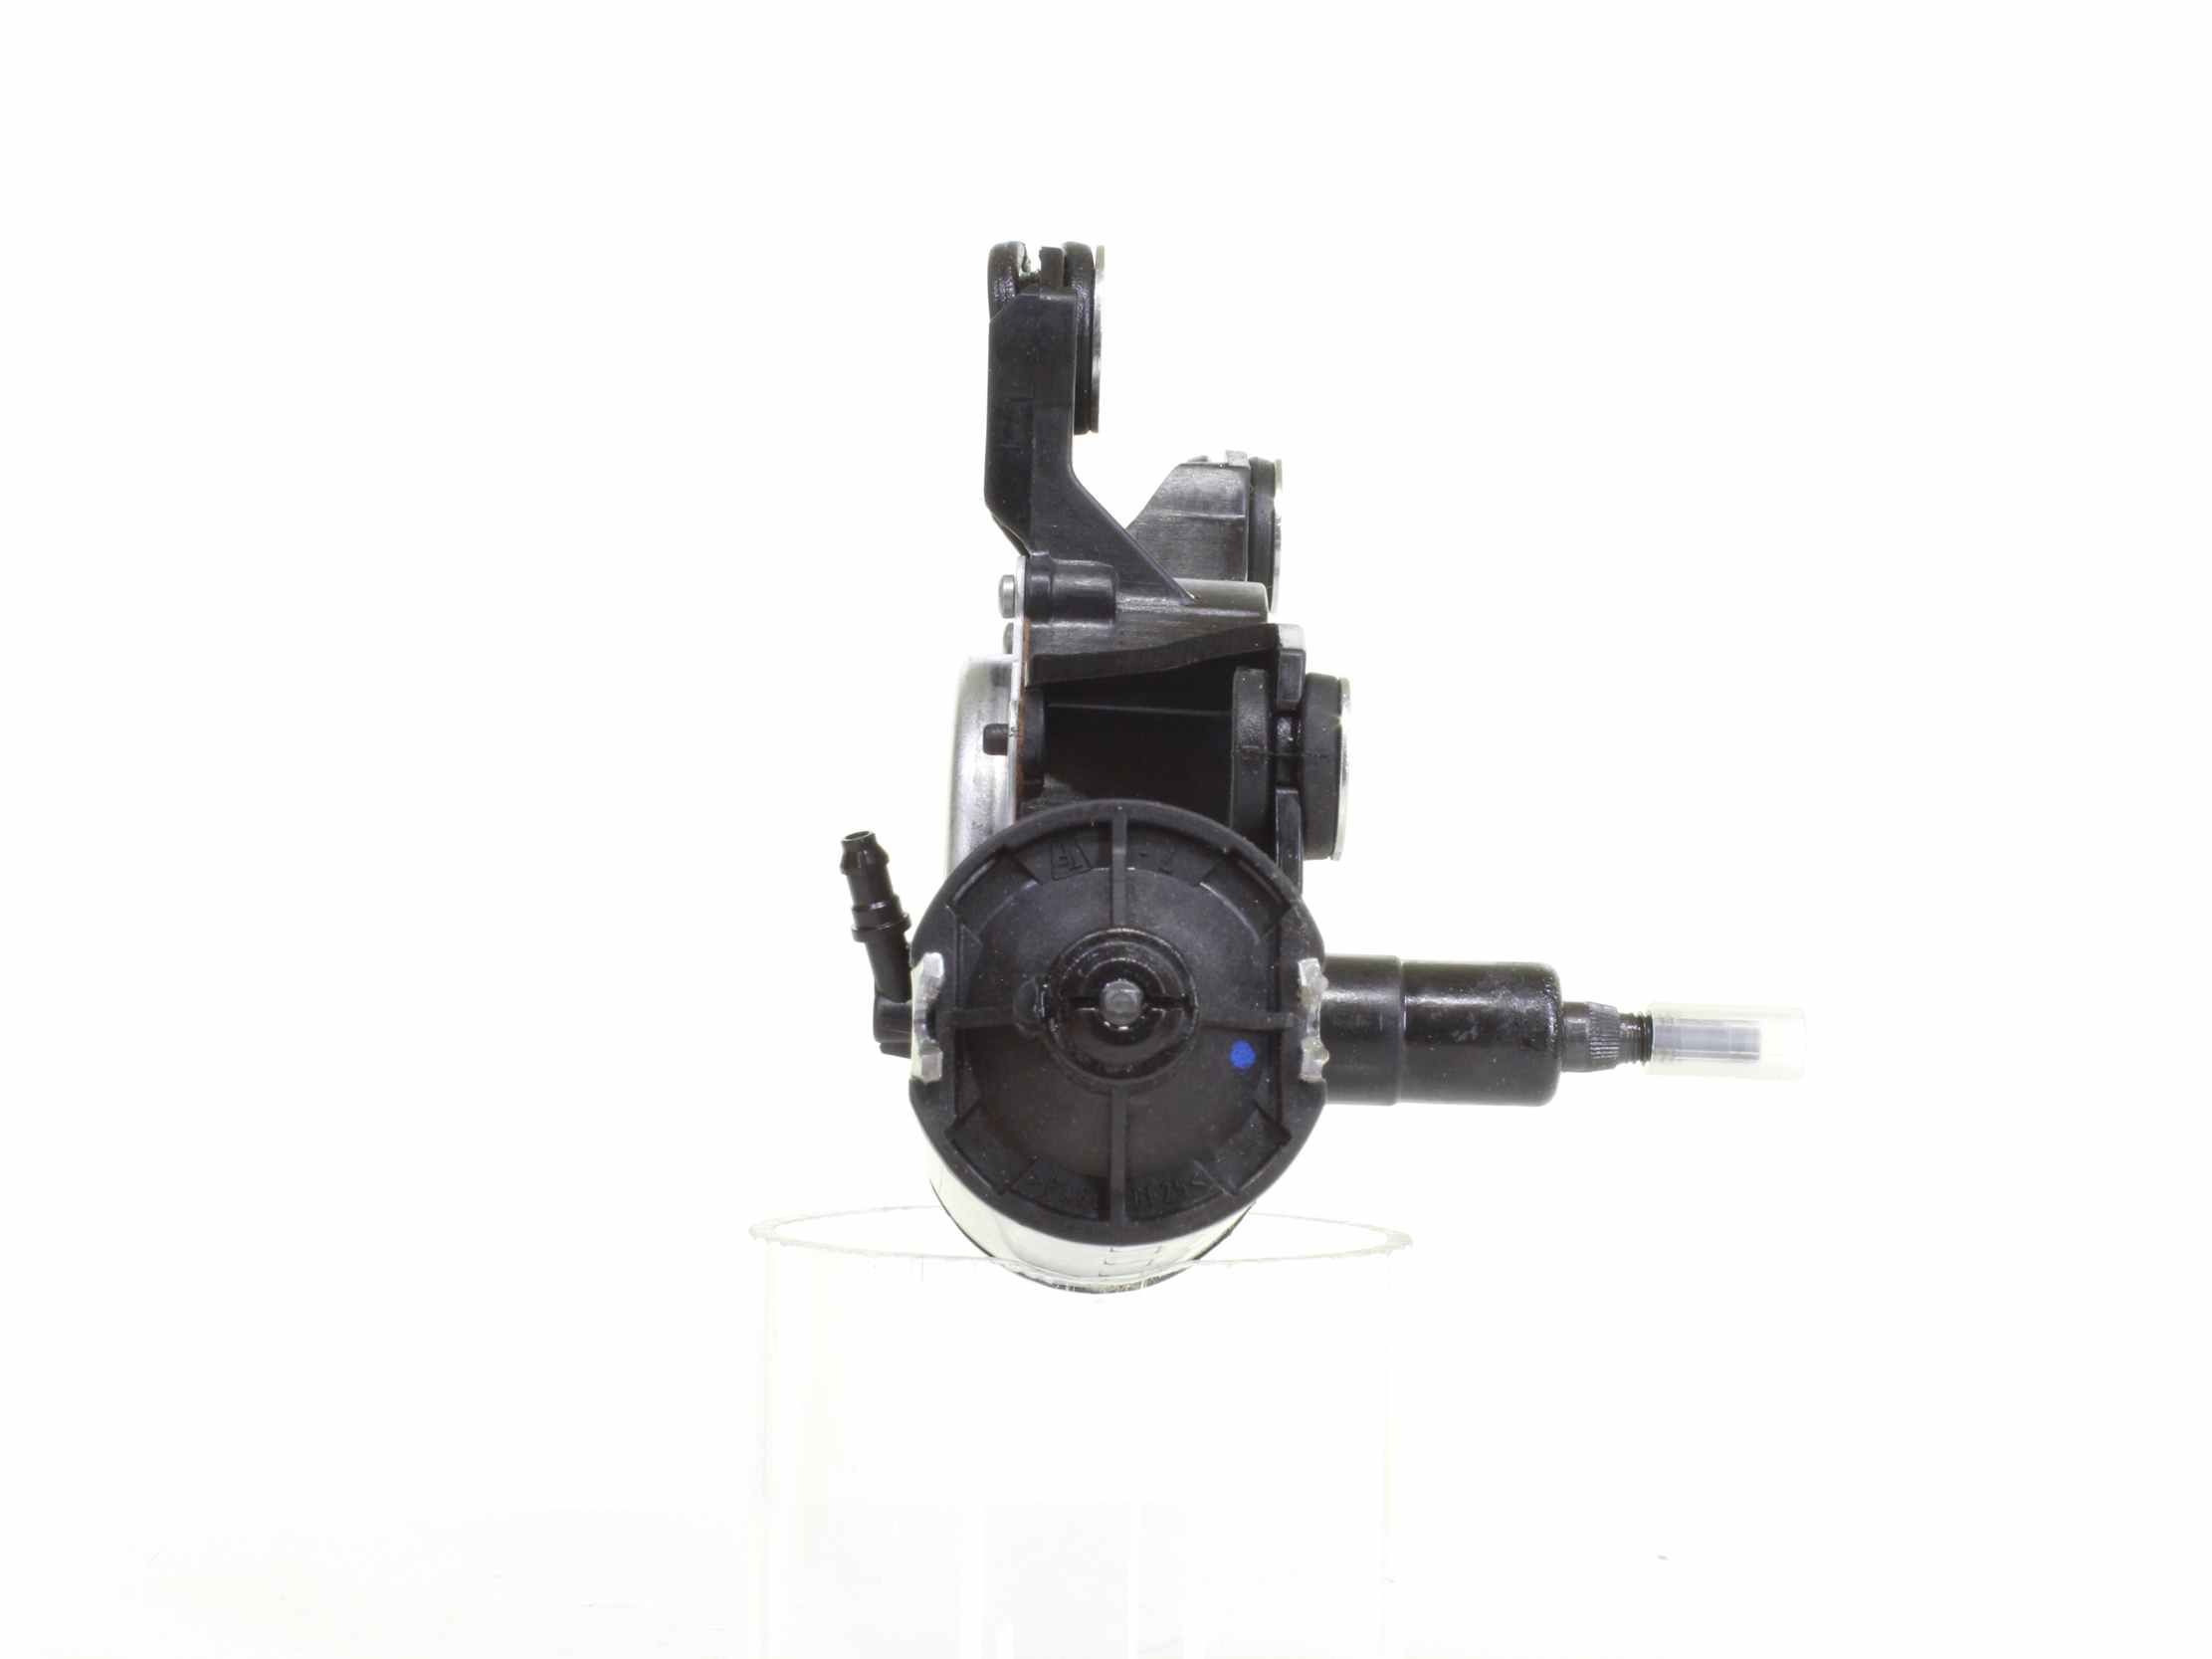 10800041 Motor for windscreen wipers 10800041 ALANKO 12V, Rear, for left-hand/right-hand drive vehicles